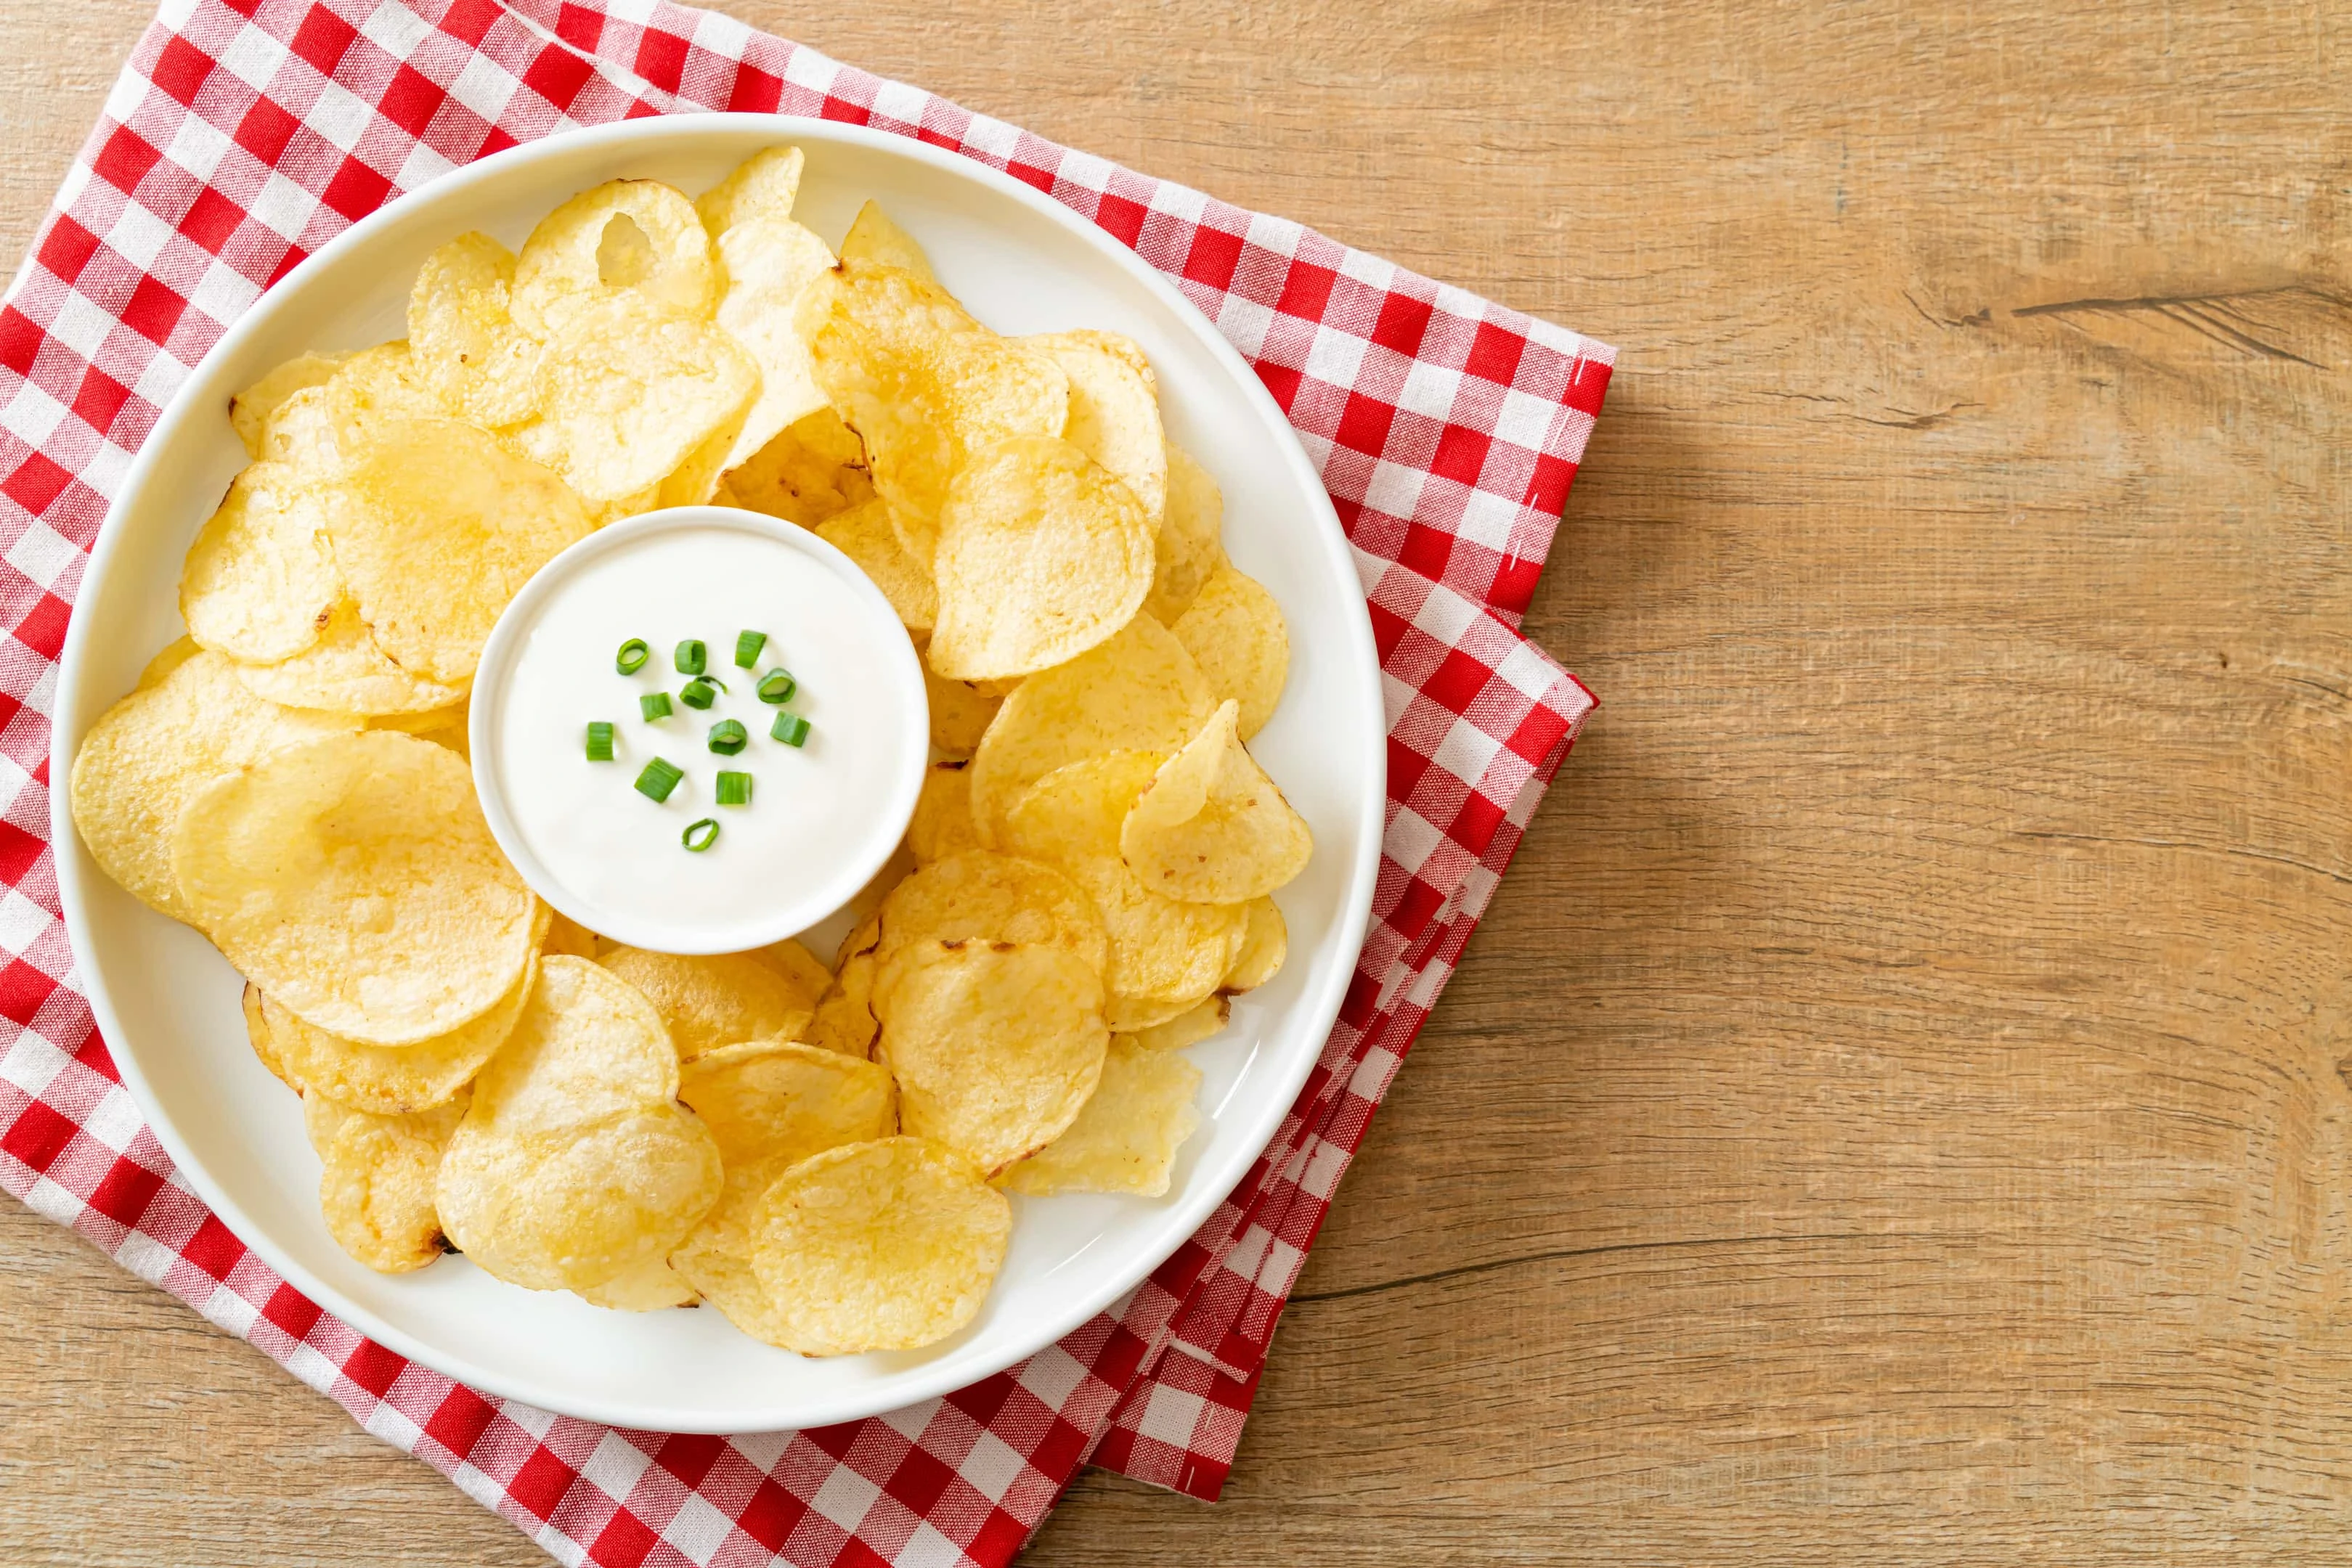 Potato chips with sour cream dipping sauce on a plate